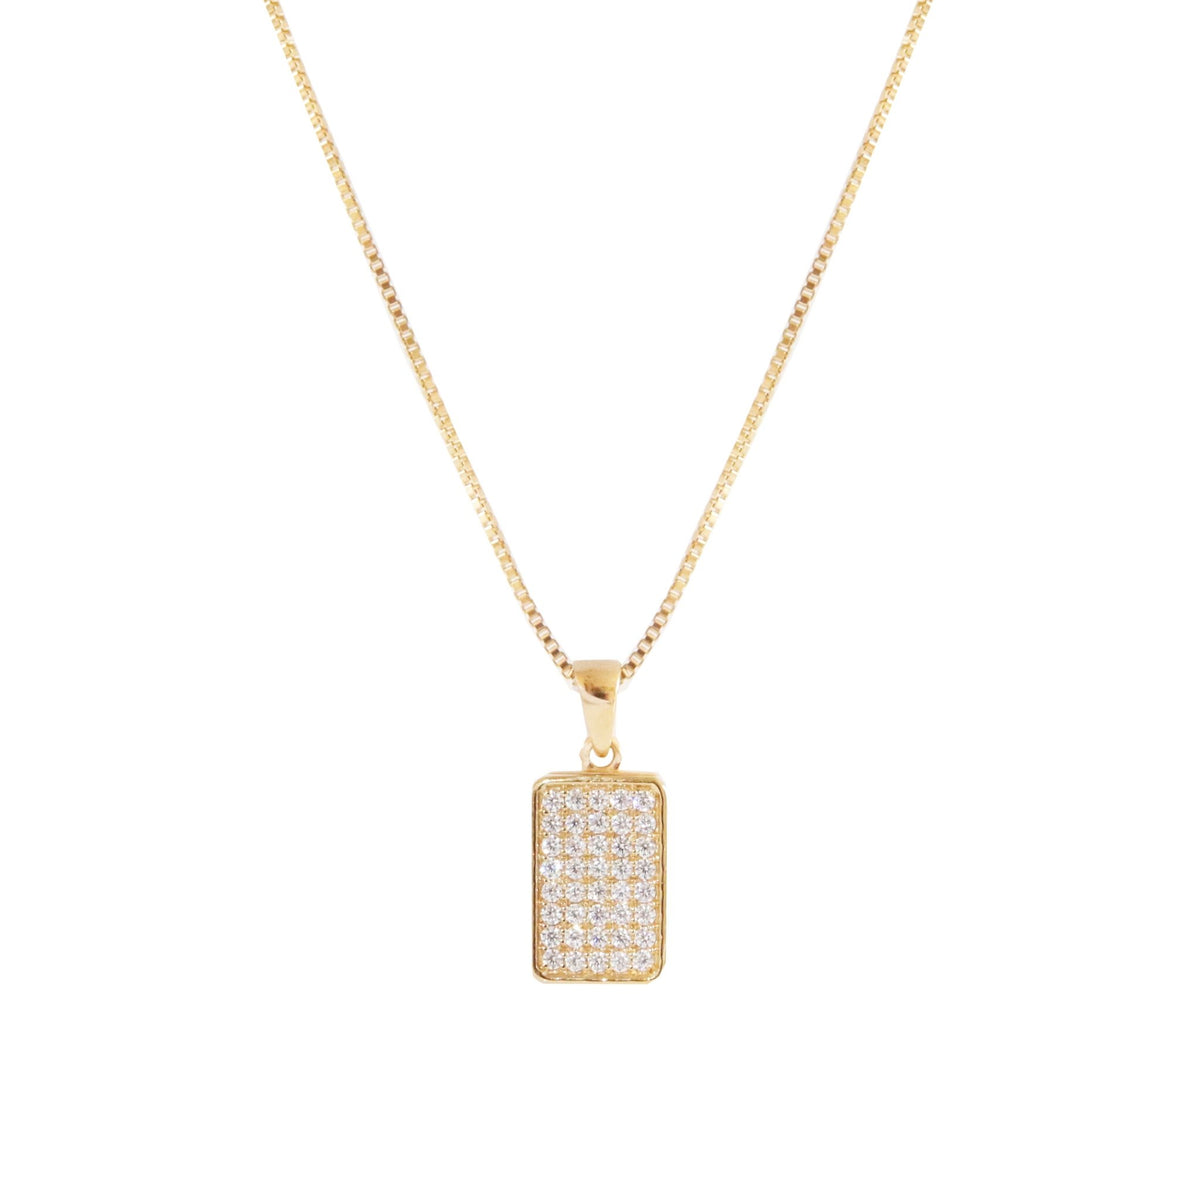 LOVE DAINTY DOG TAG NECKLACE GOLD - SO PRETTY CARA COTTER